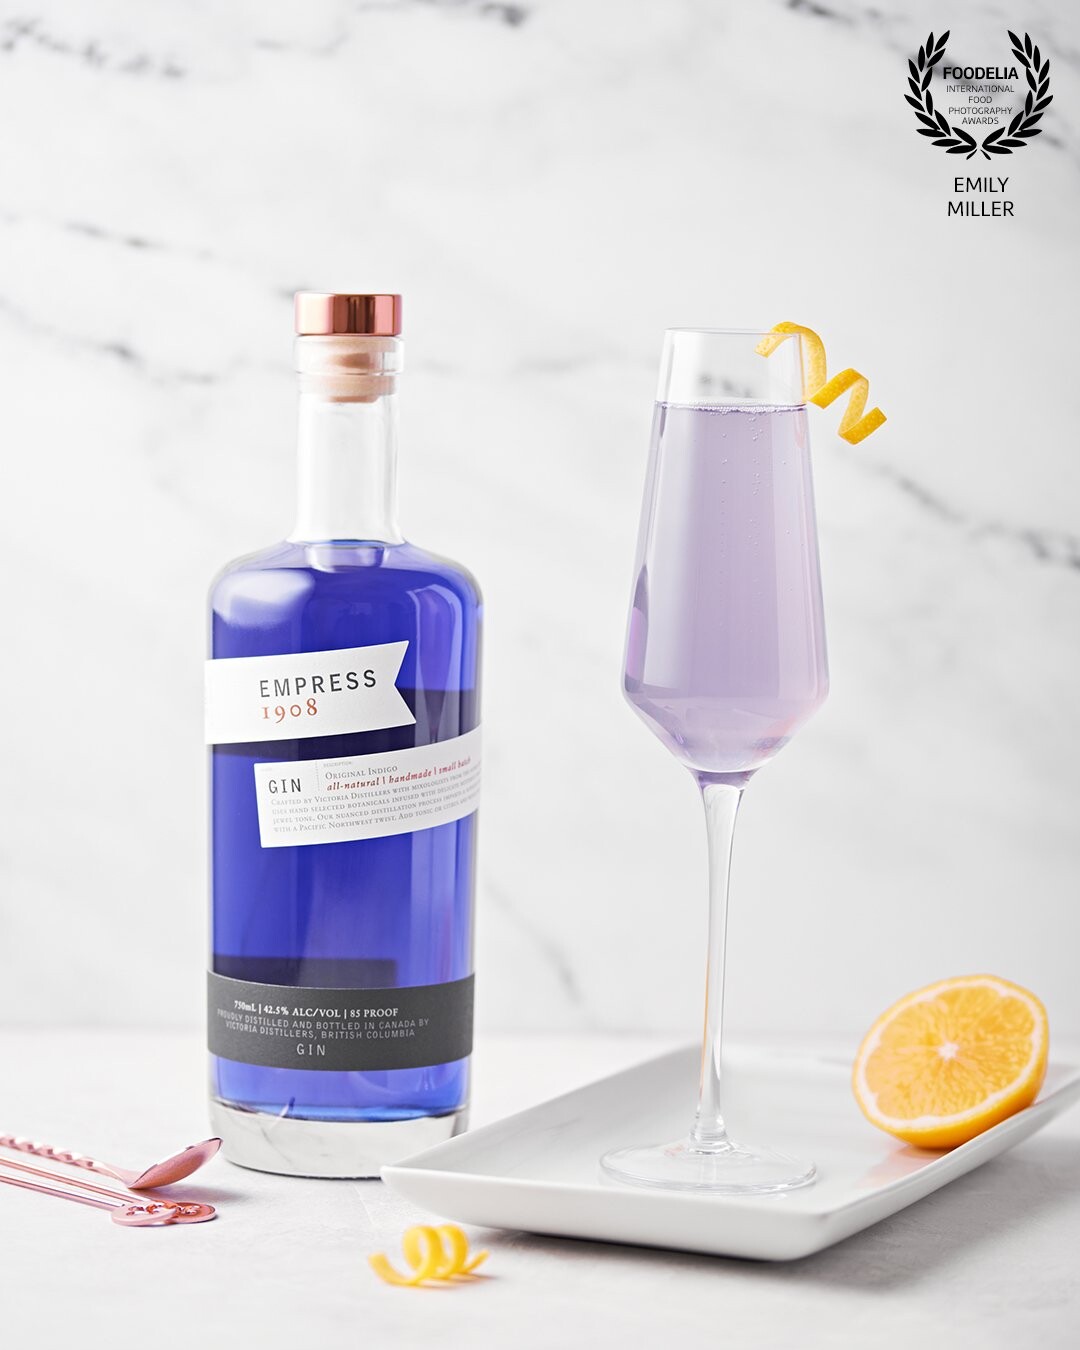 I shot this image of a Meyer Lemon French 75 with Empress 1908 Gin, accented by a fresh Meyer lemon twist. Diffused light from a softbox on the left with a white reflector on the right.